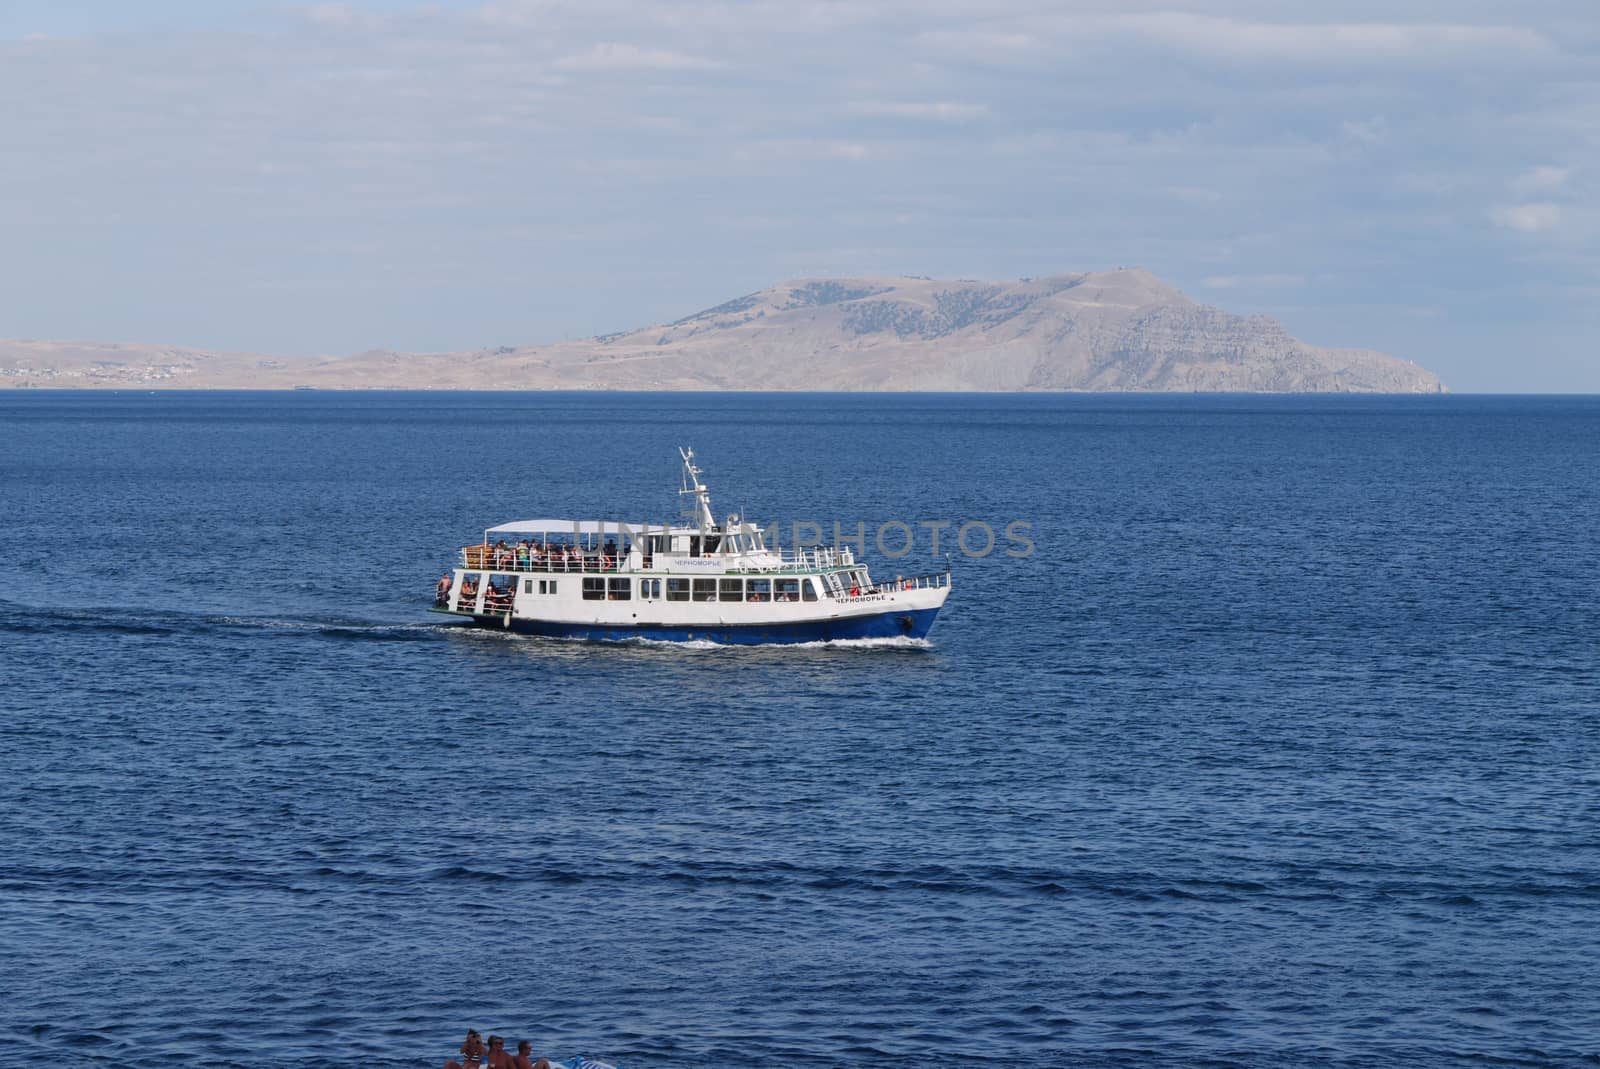 A boat that passes tourists to the other shore through the endless blue sea